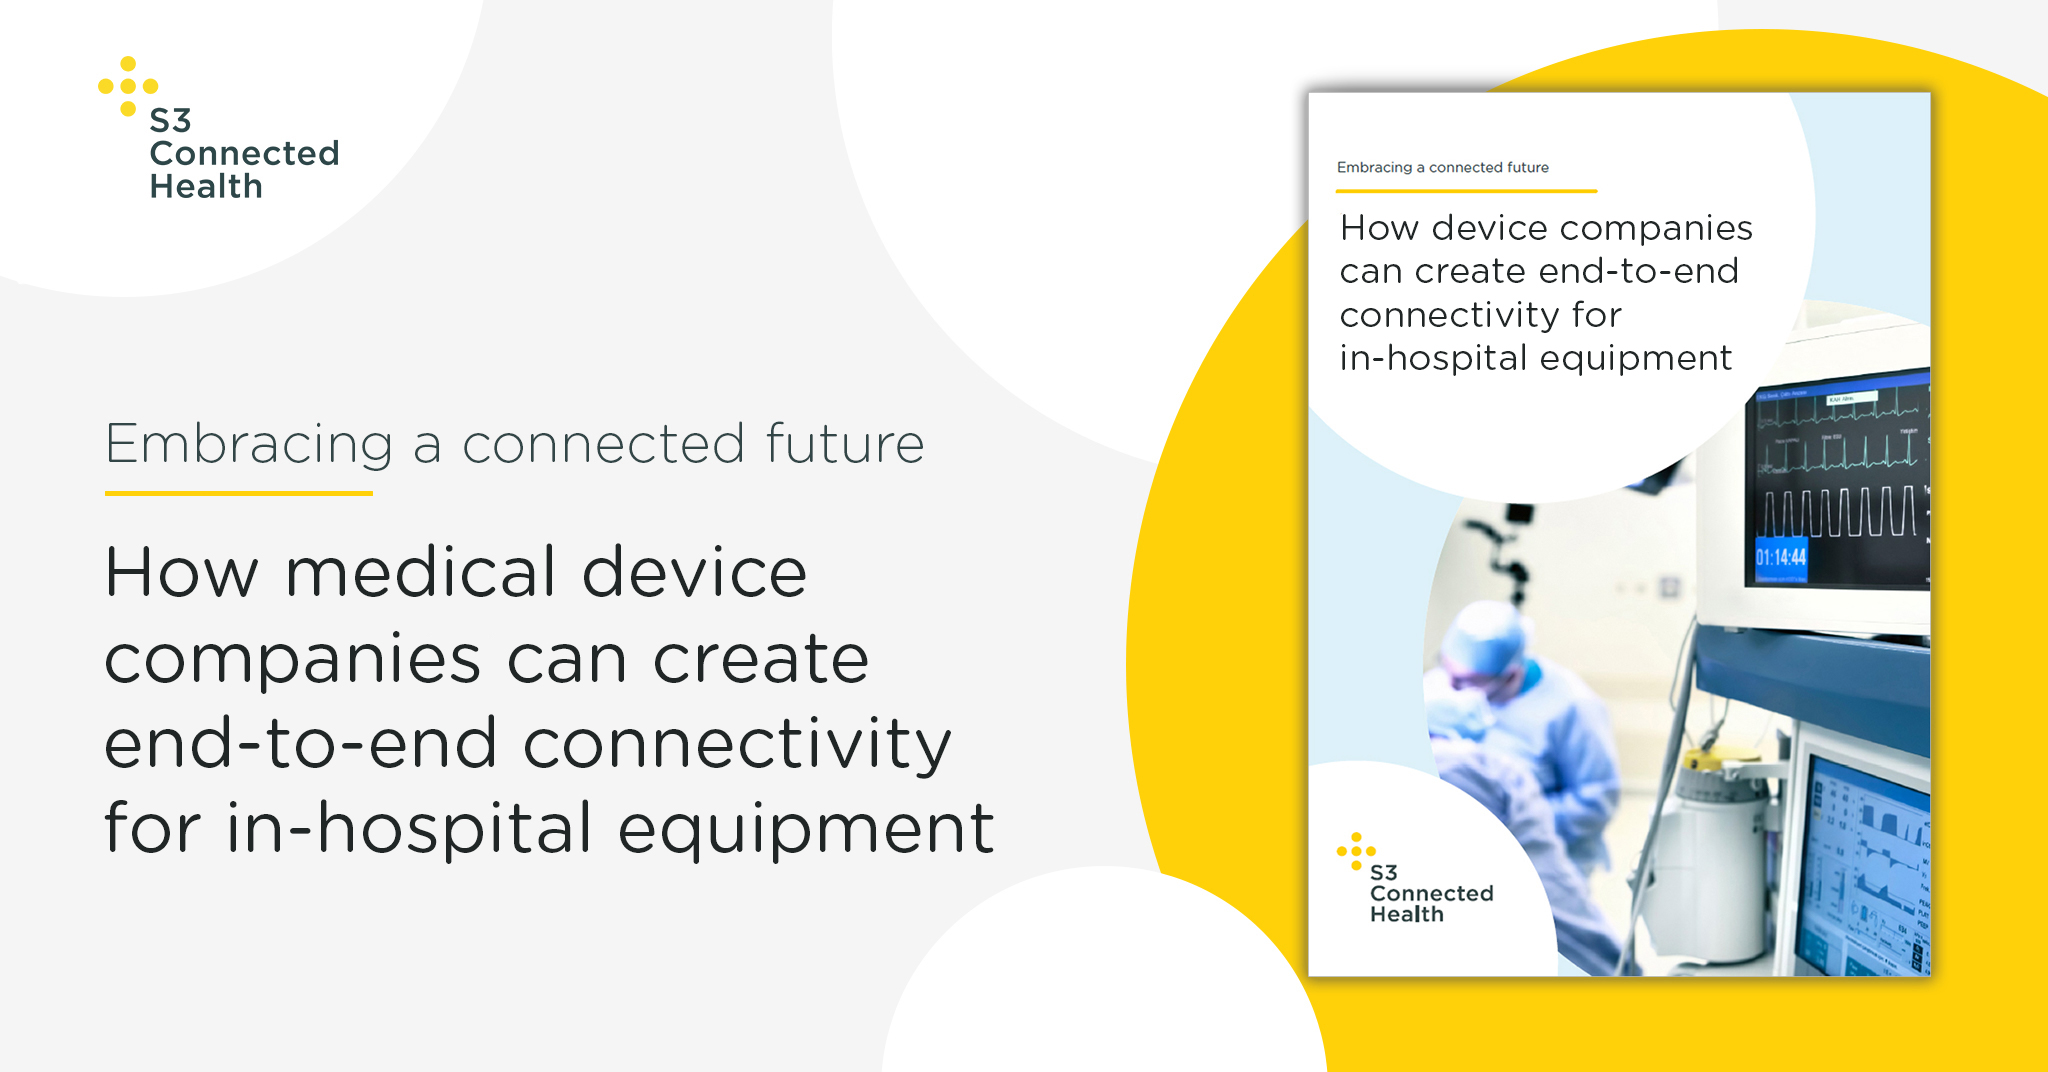 Whitepaper release: How medical device companies can create end-to-end connectivity for in-hospital equipment